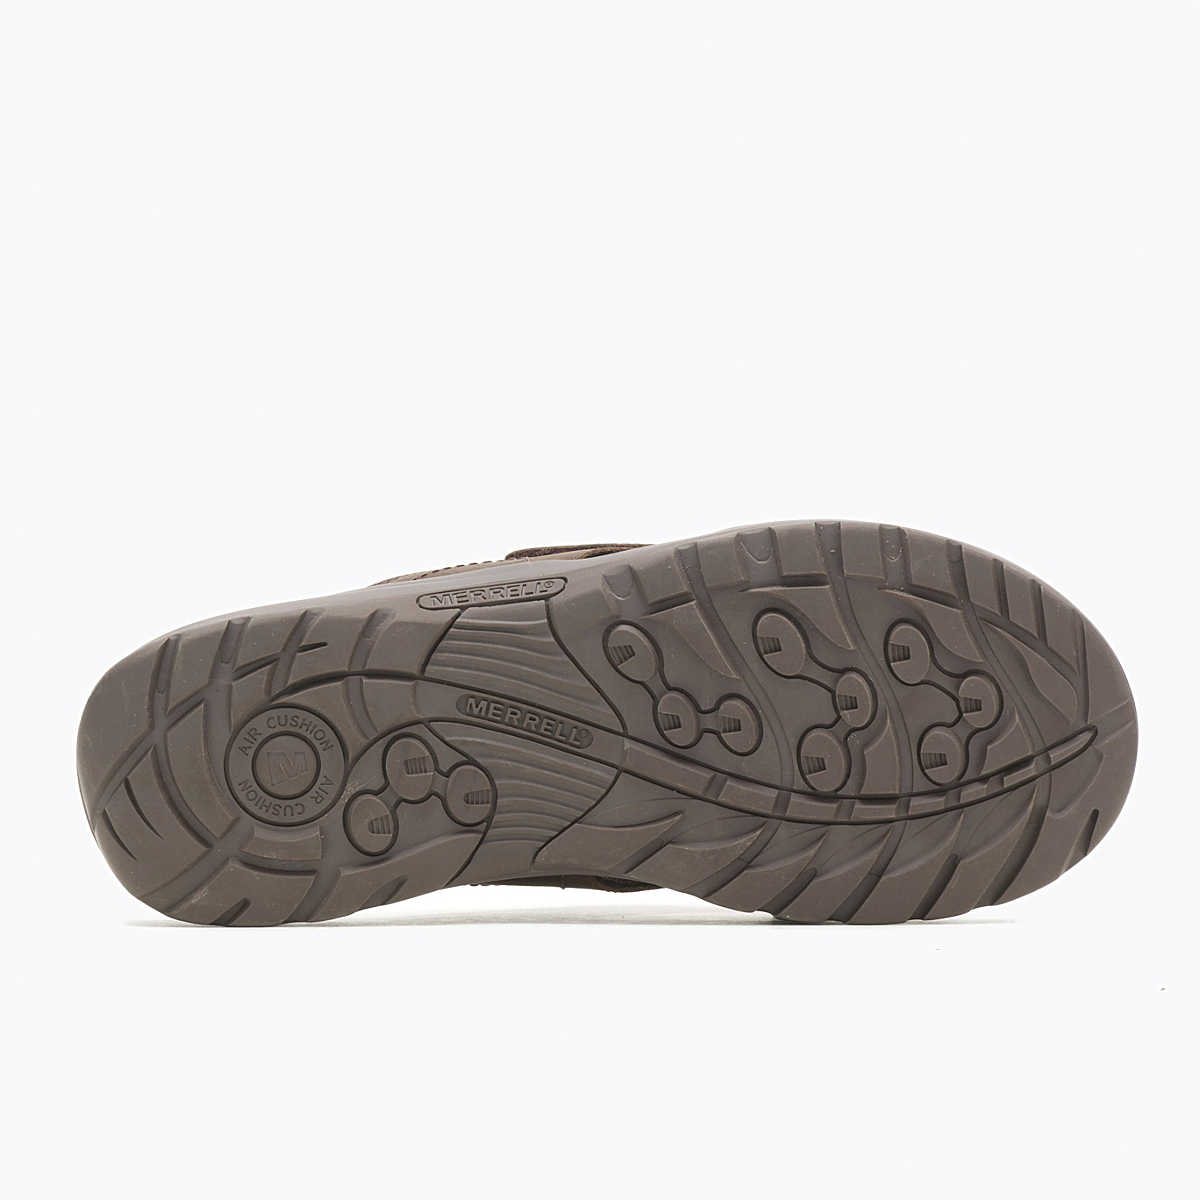 Rubber Outsole - Provides reliable traction on various surfaces.